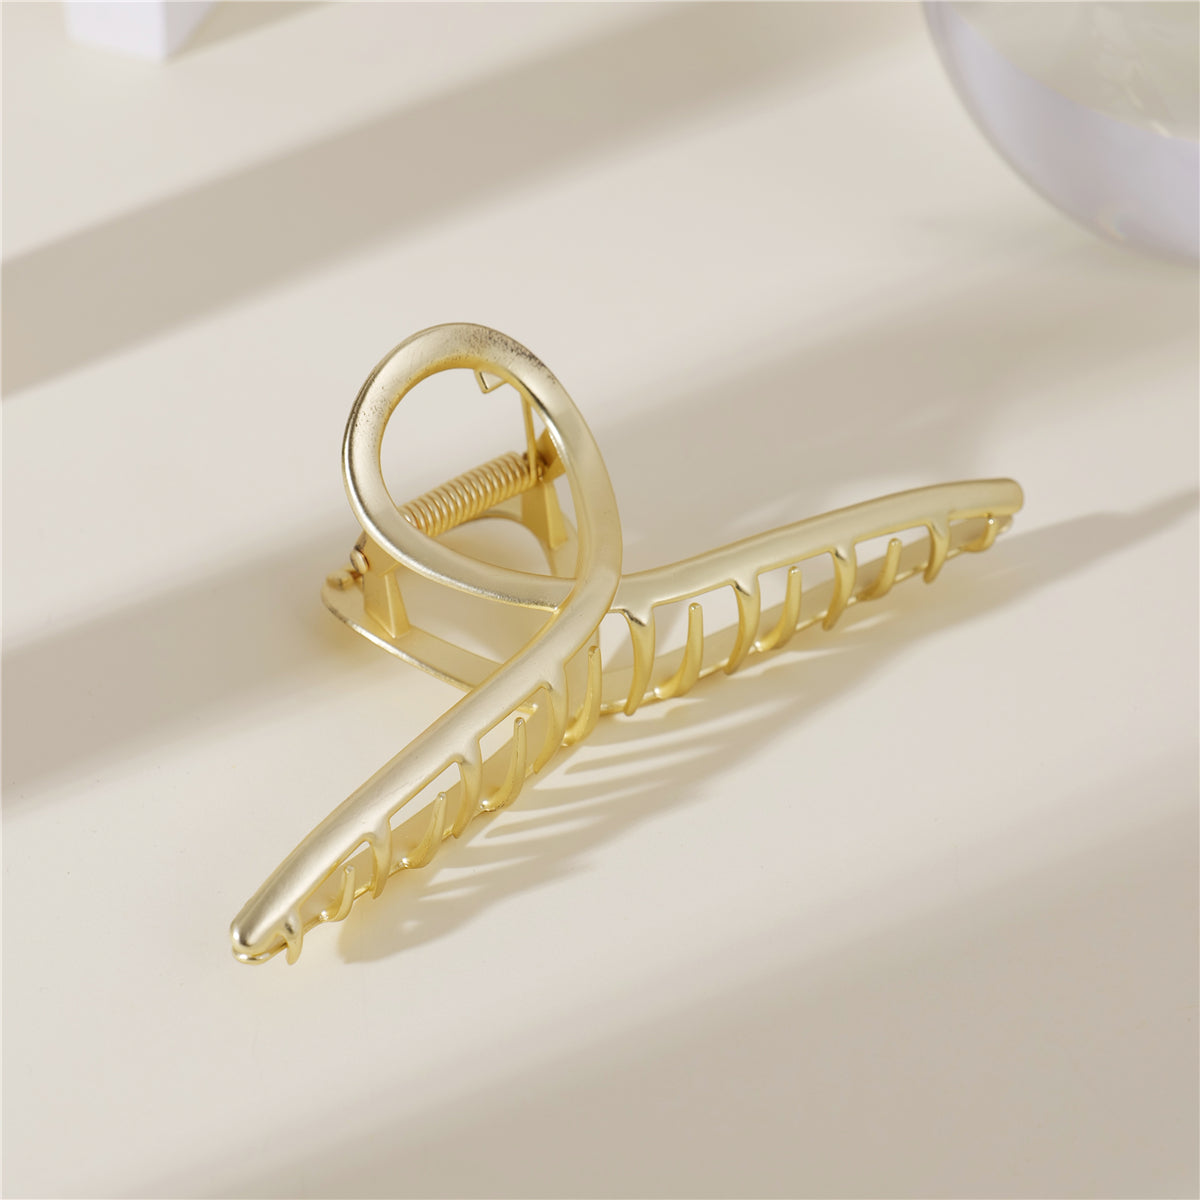 Gold and Silver Large Metal Hair Claws 2-Pc Set